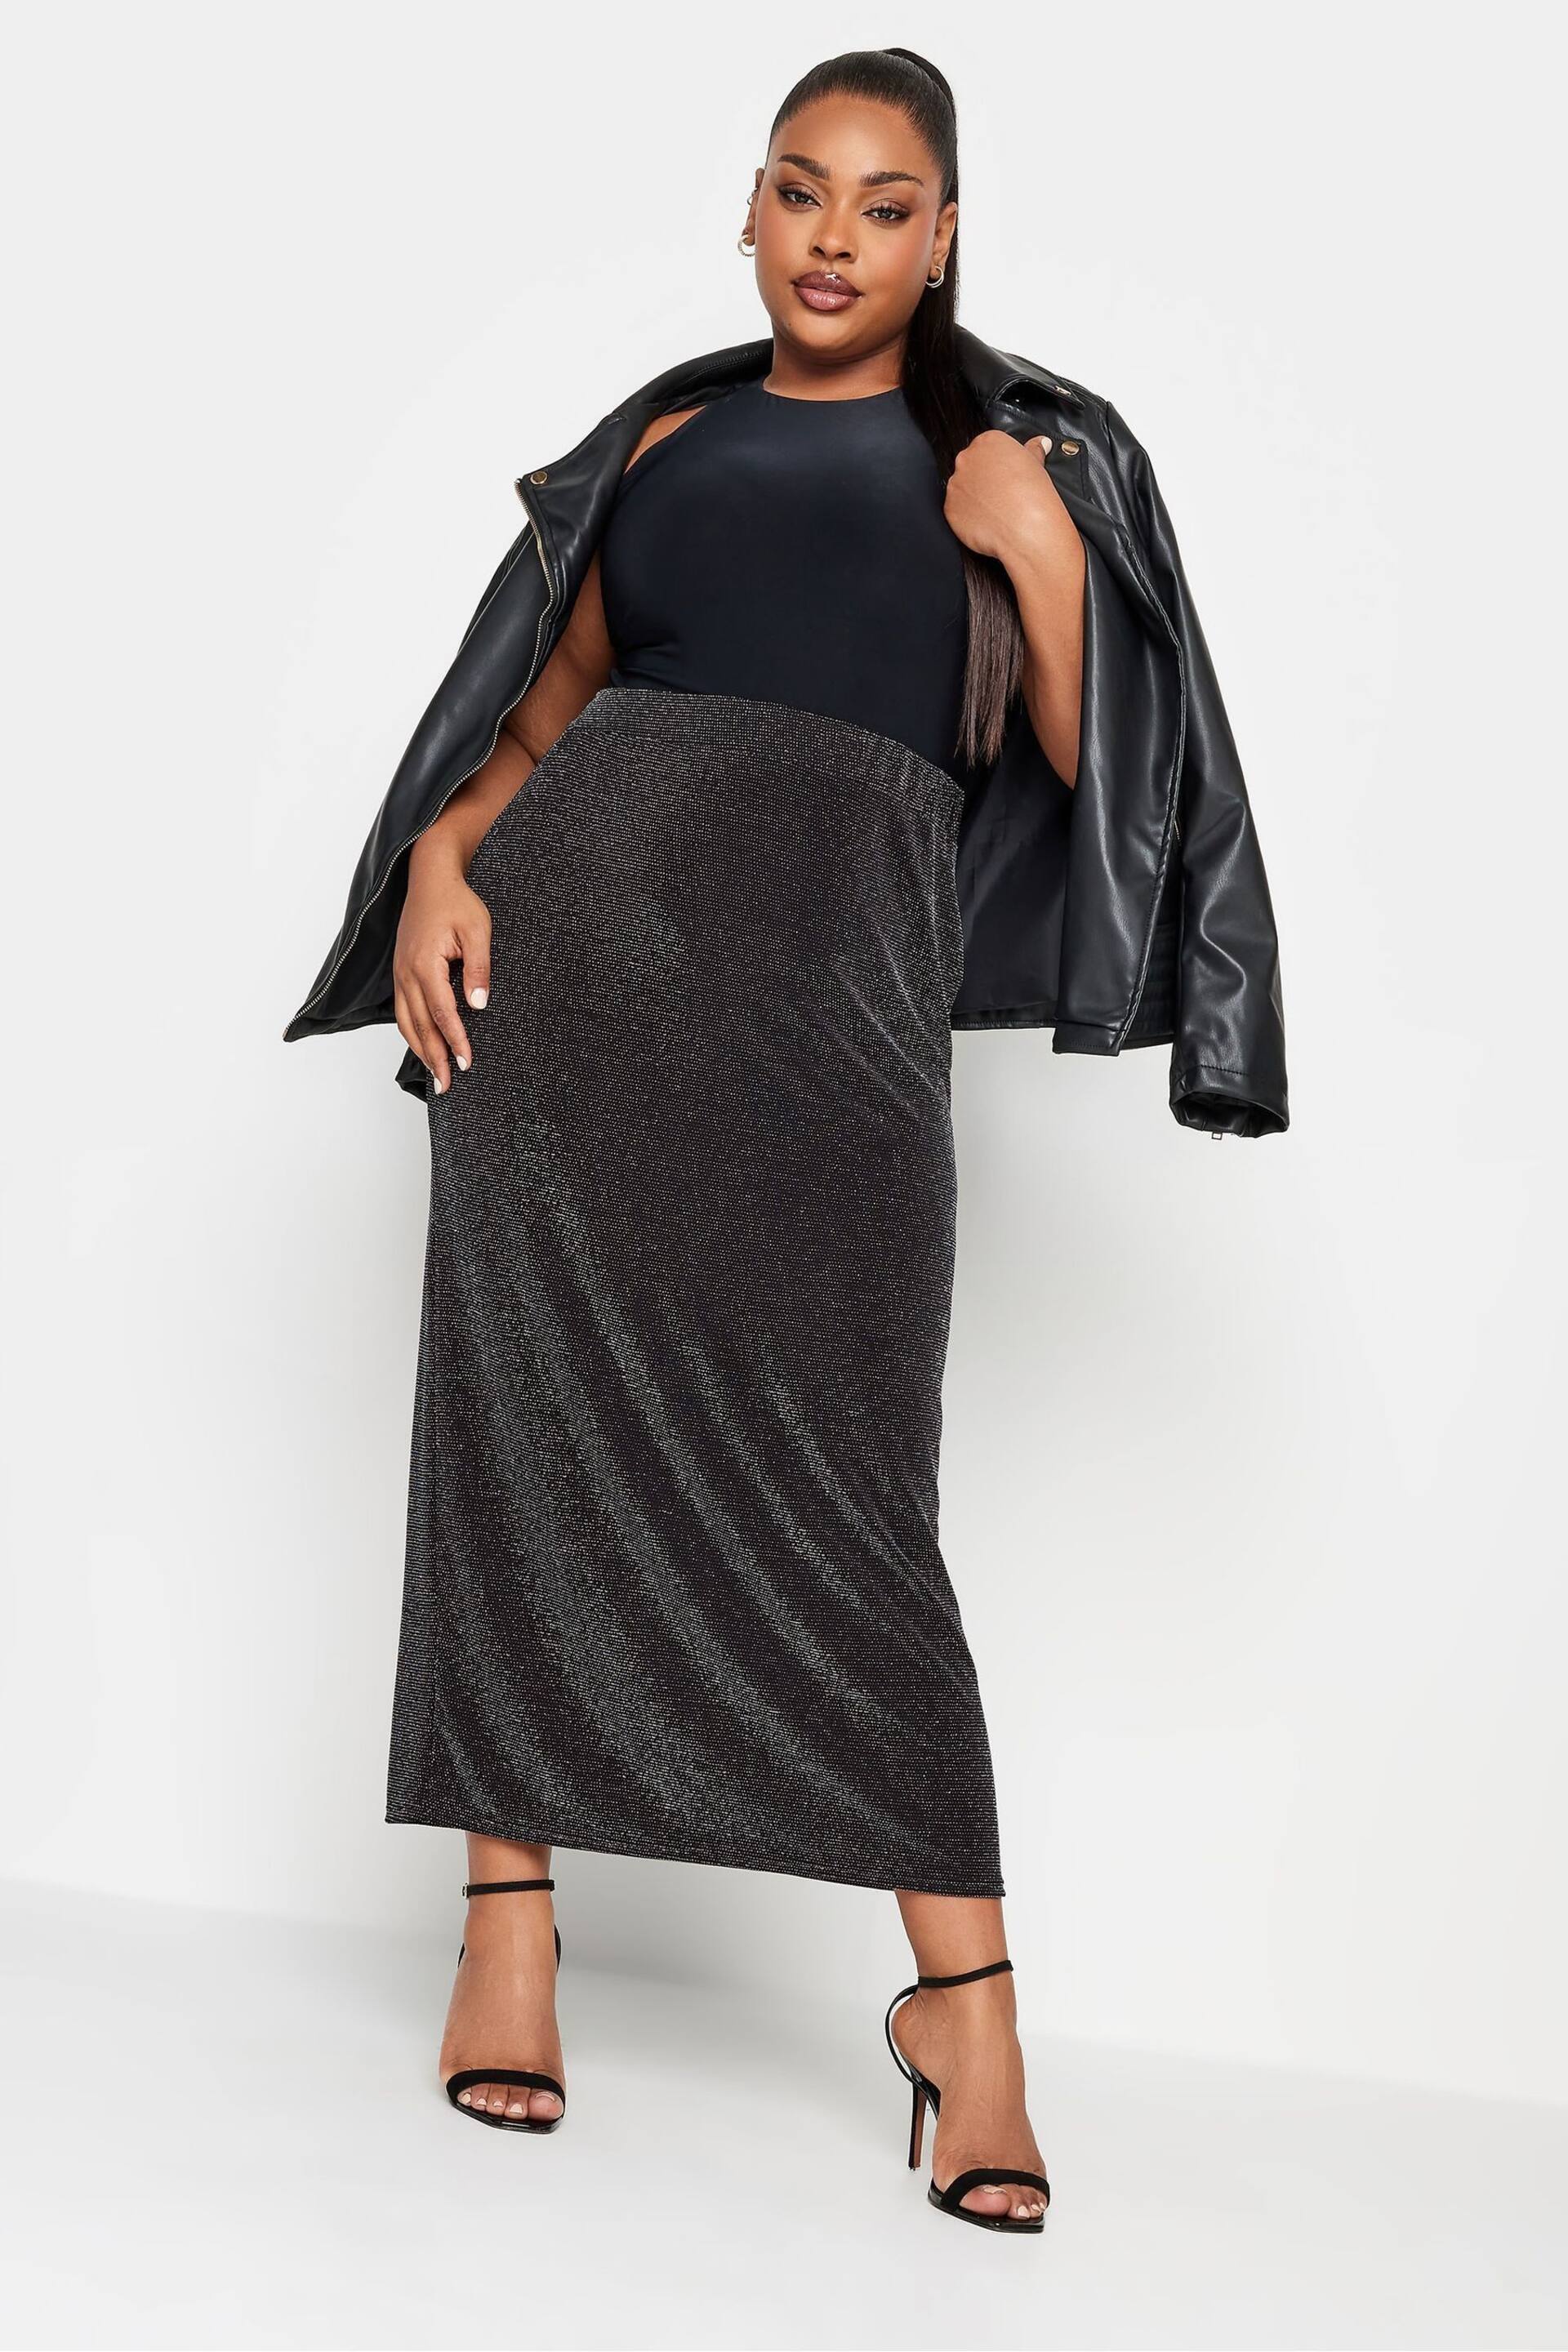 Yours Curve Black Brillo Tube Skirt - Image 4 of 5